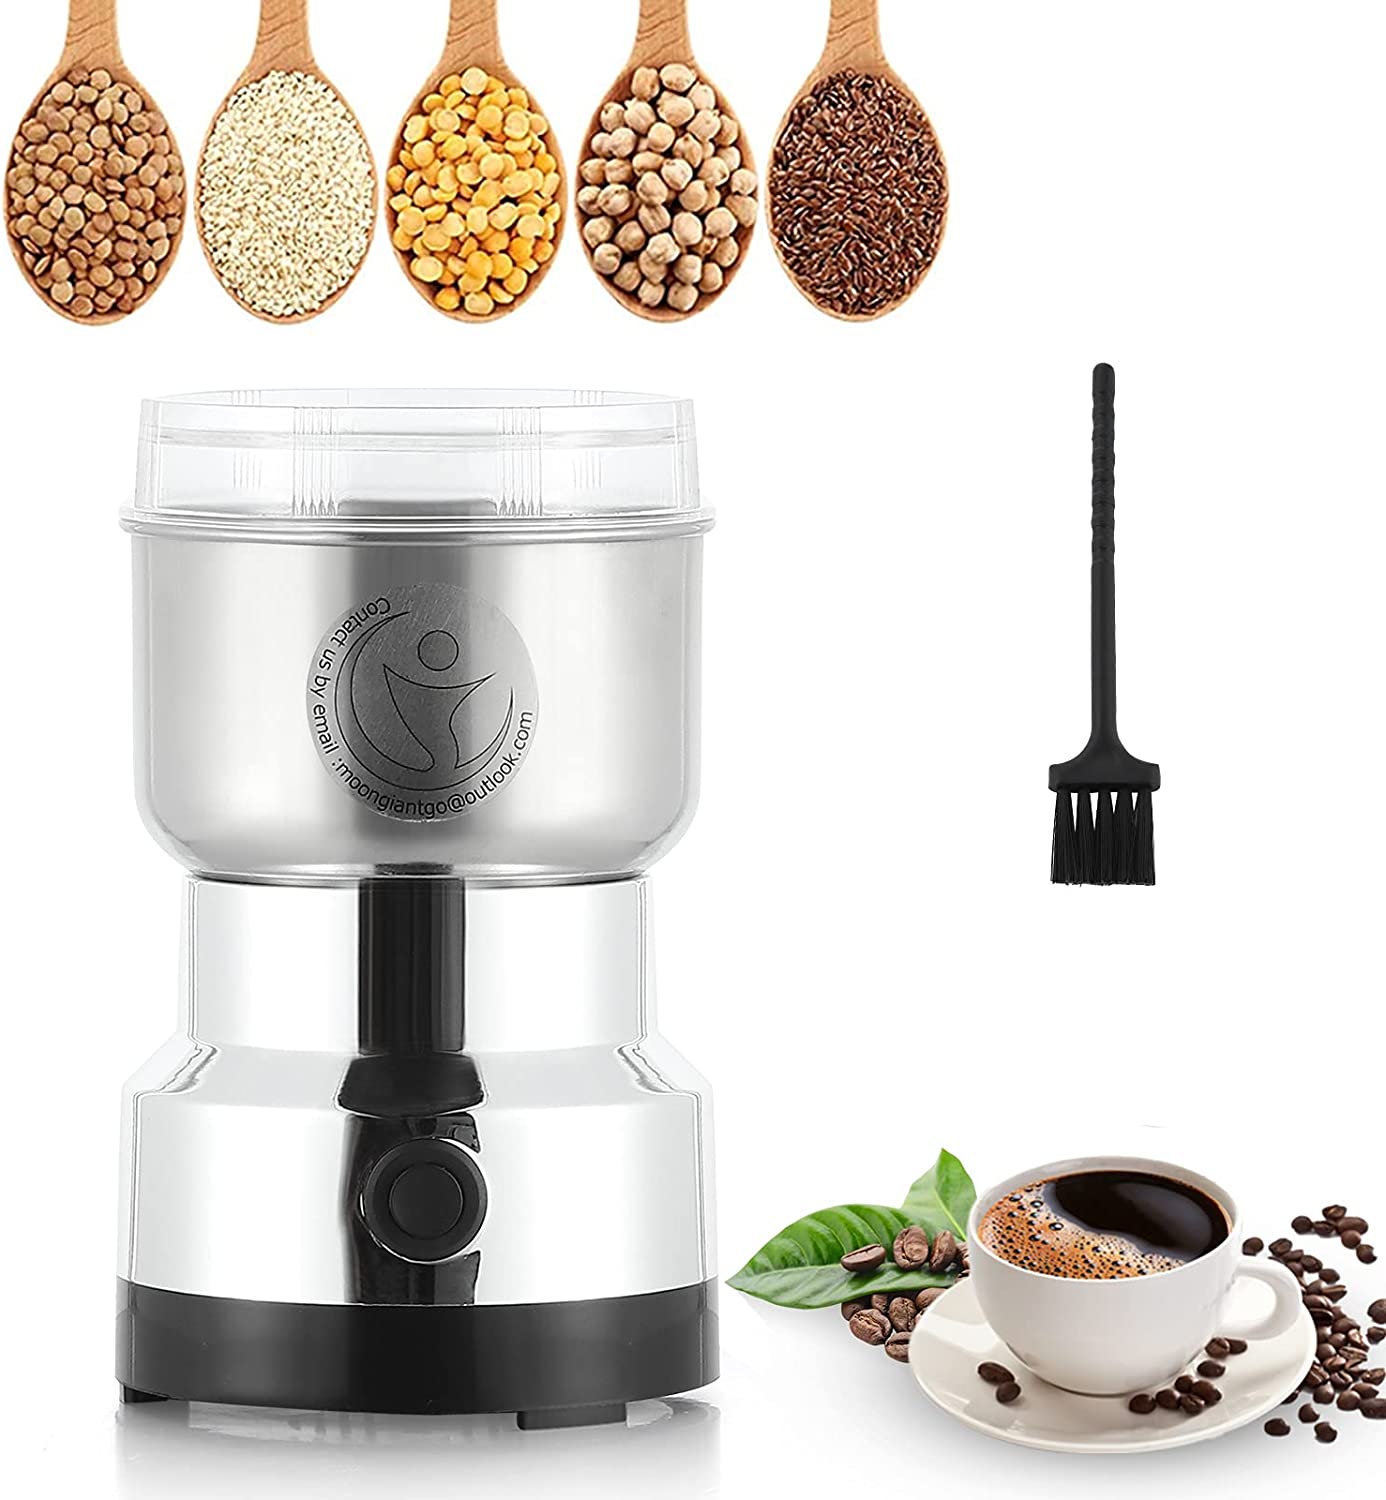 Moongiantgo Grain Mill Multifunctional 400 W 35000 rpm Spice Mill Ultra Fine Coffee Grinder, 300 ml Capacity, Stainless Steel, for Dry Materials, Spices, Herbs, Coffee (Silver)